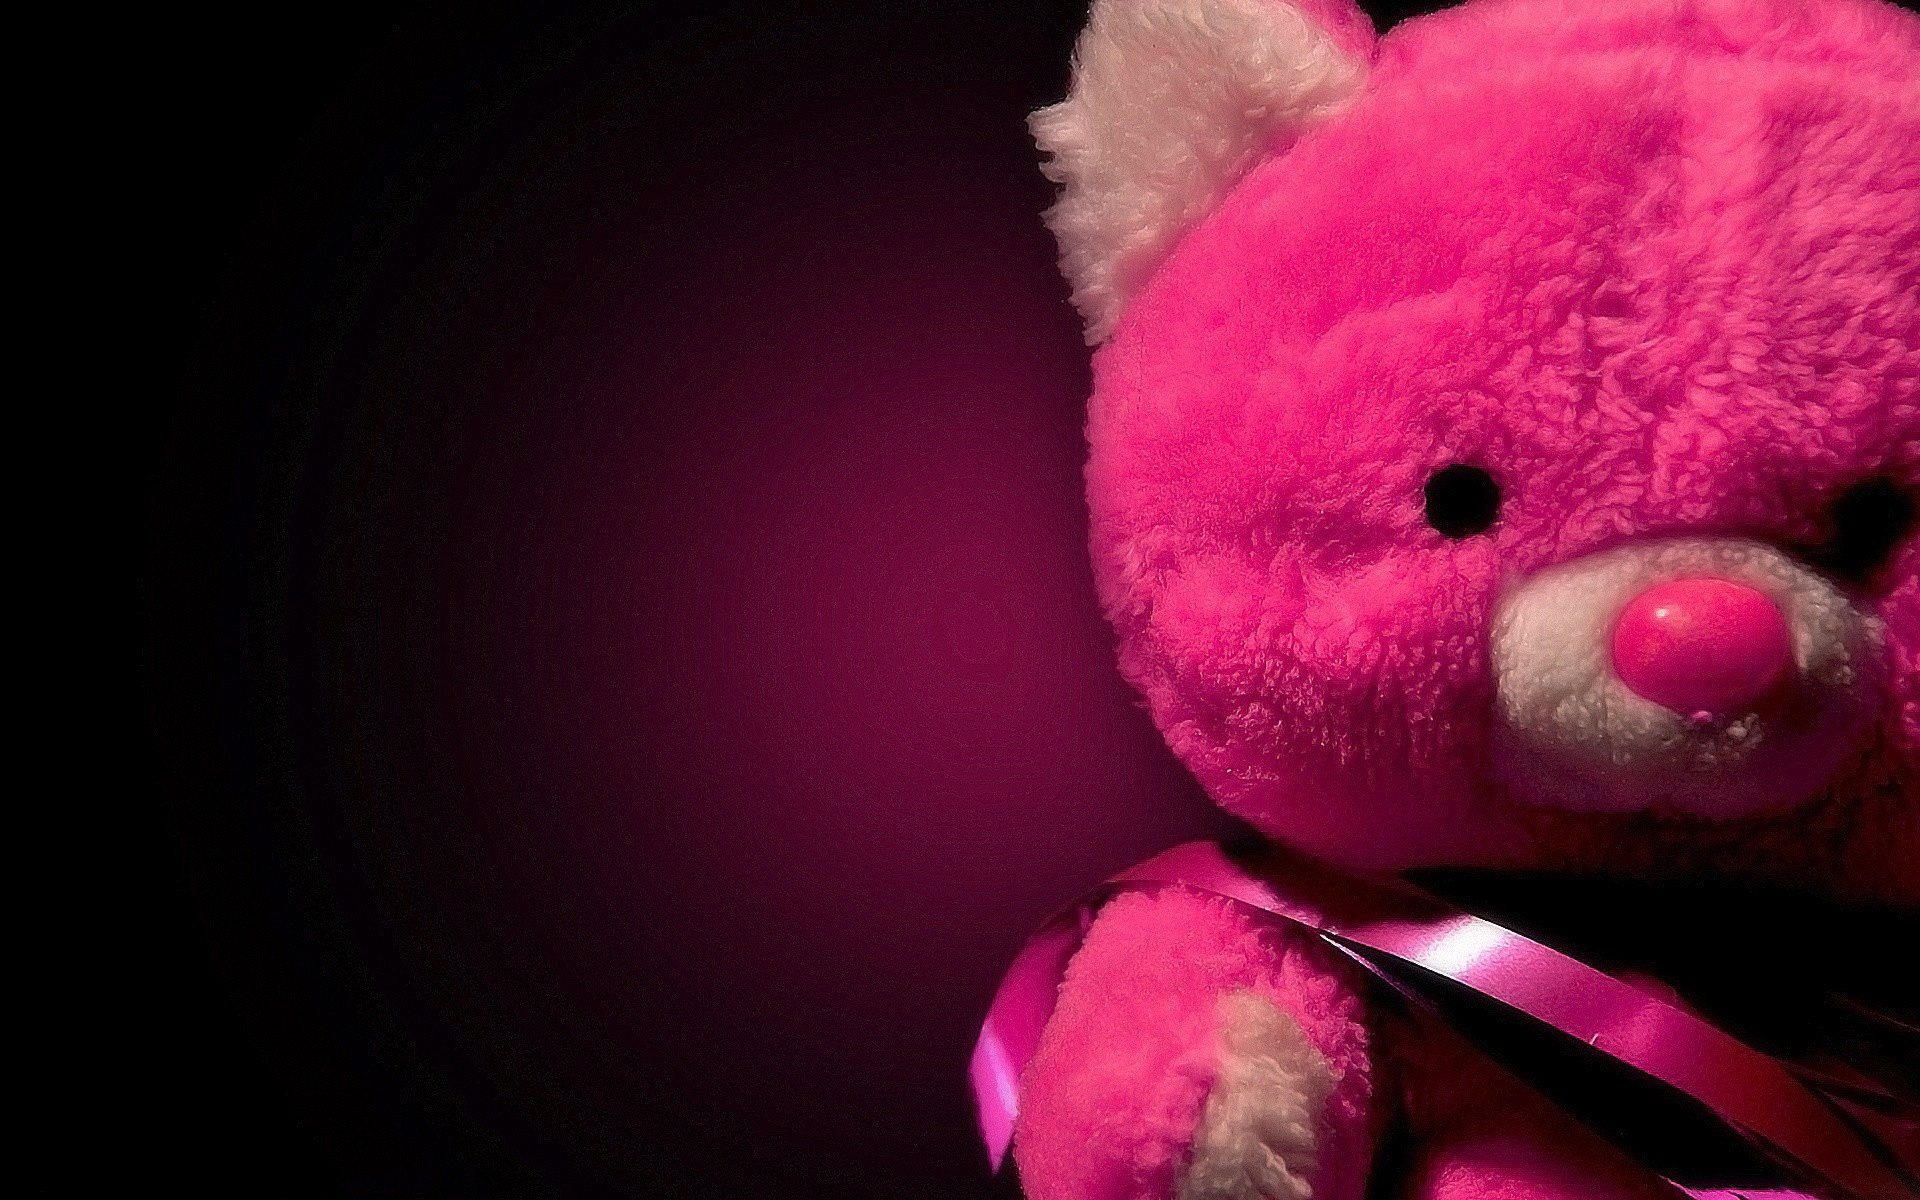 Pink Teddy Bear Cute Wallpaper Share This On